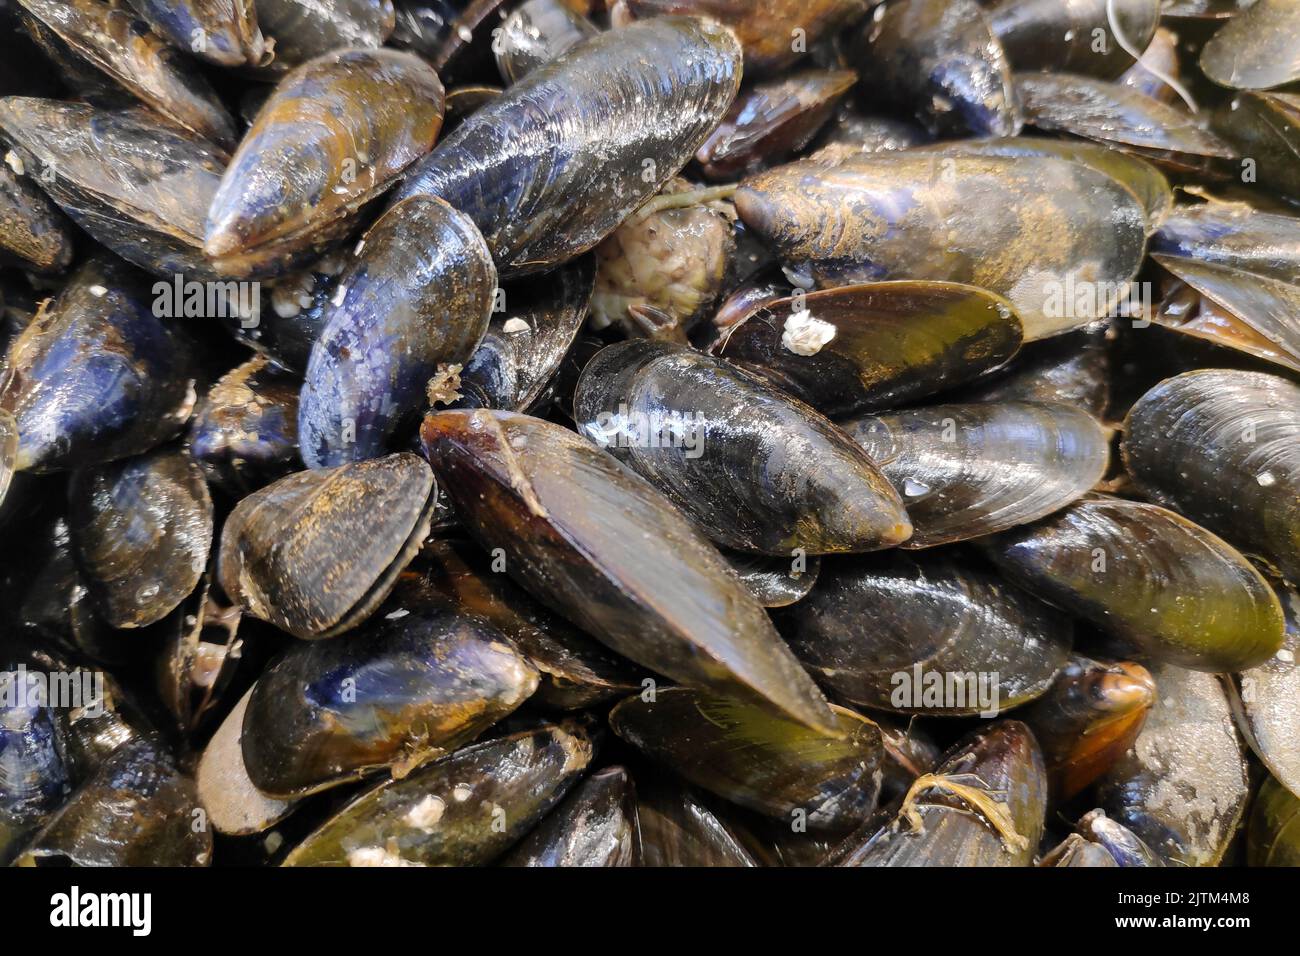 A bunch of mussels for sale at a market stall. Stock Photo